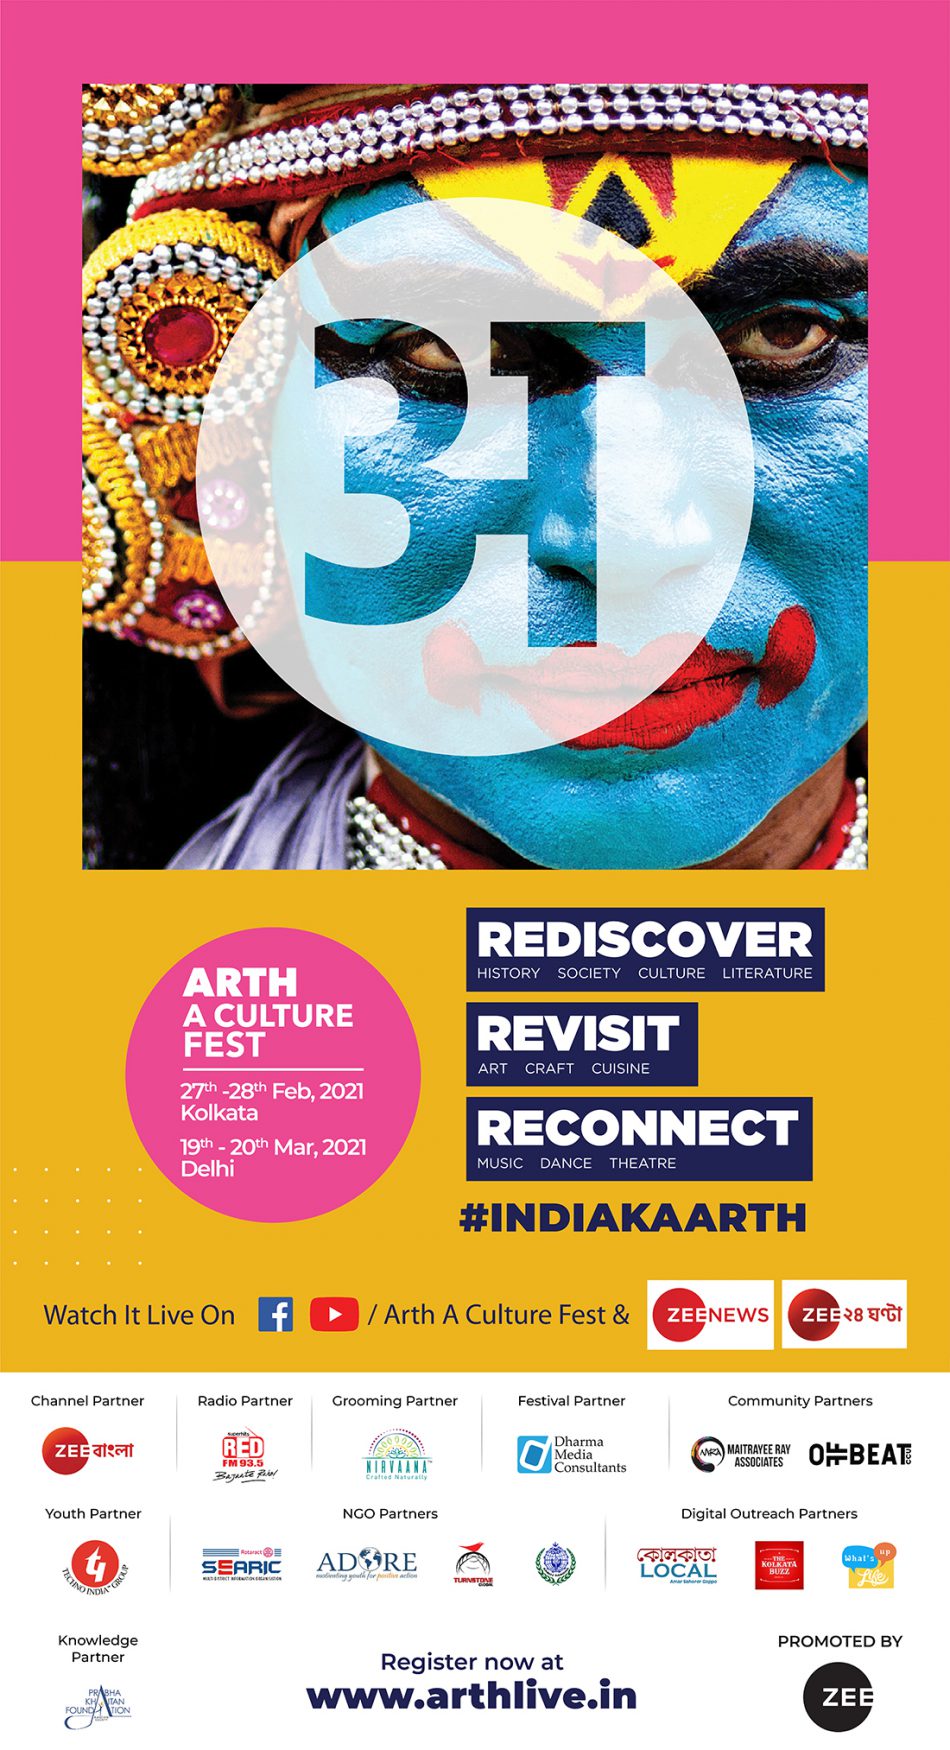 Rediscover, Reconnect and Revisit India and its Culture at ARTH – A CULTURE FEST